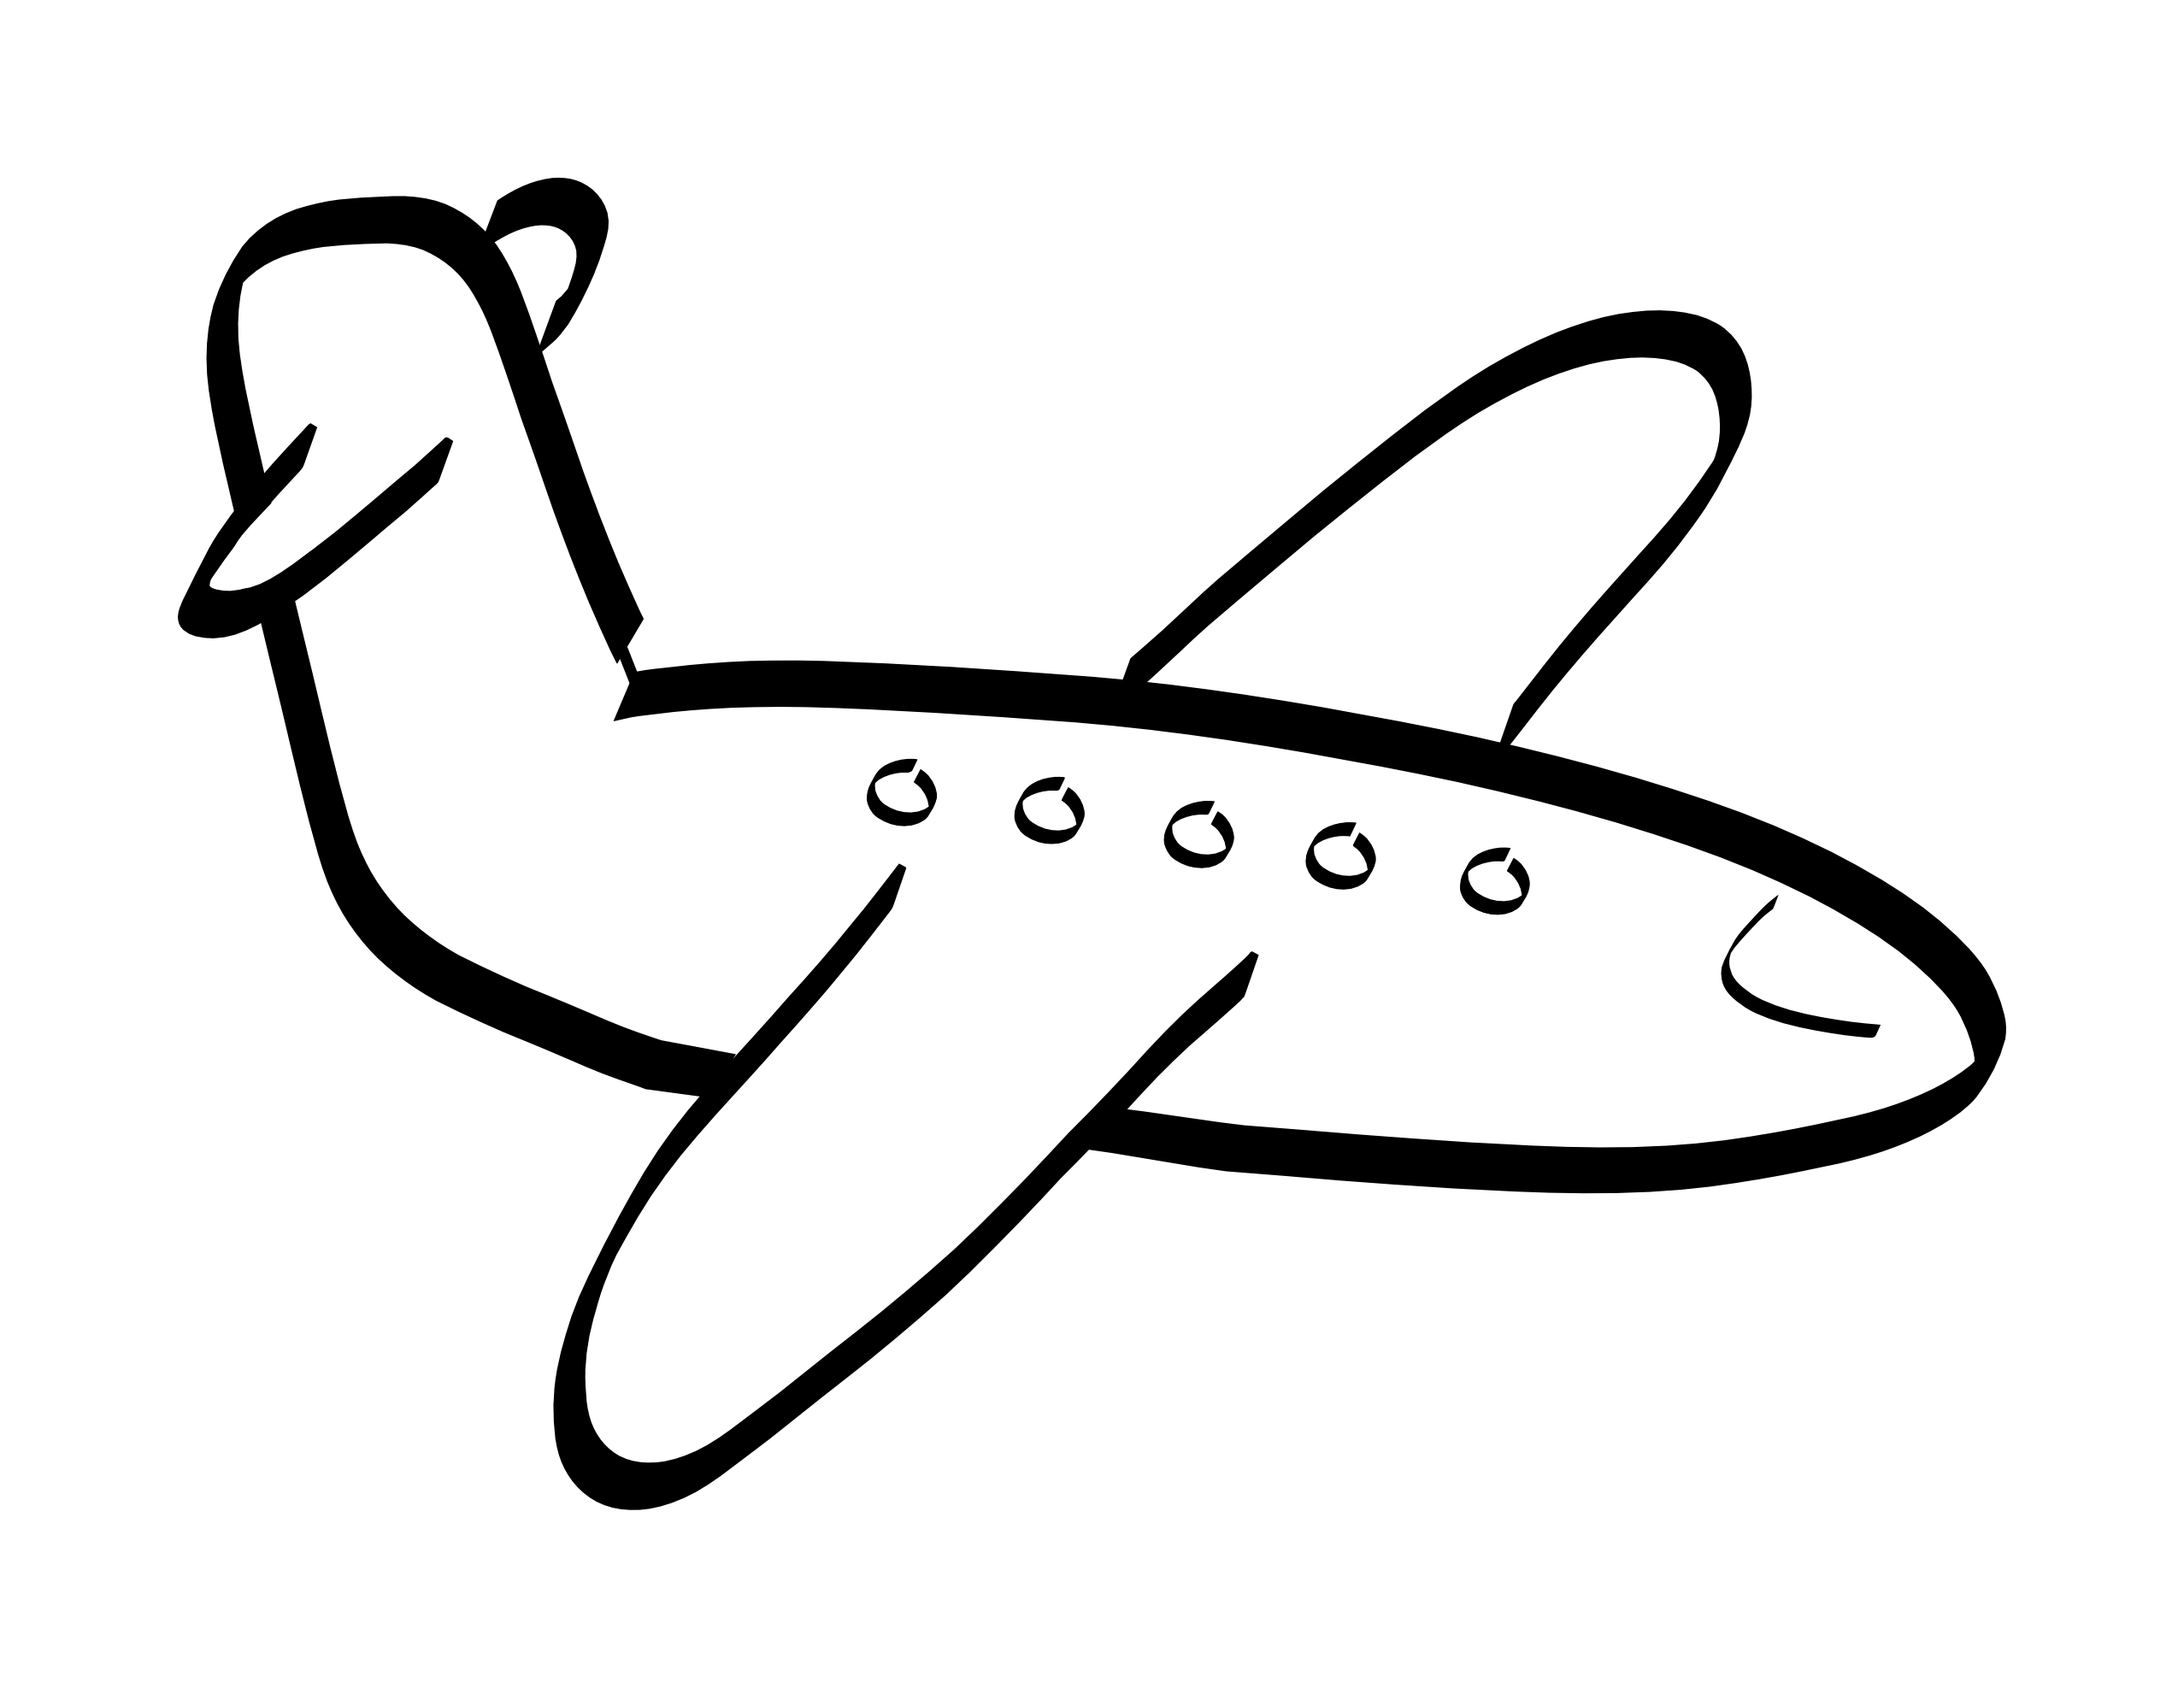 Airplane Black And White Clipart Images   Pictures   Becuo